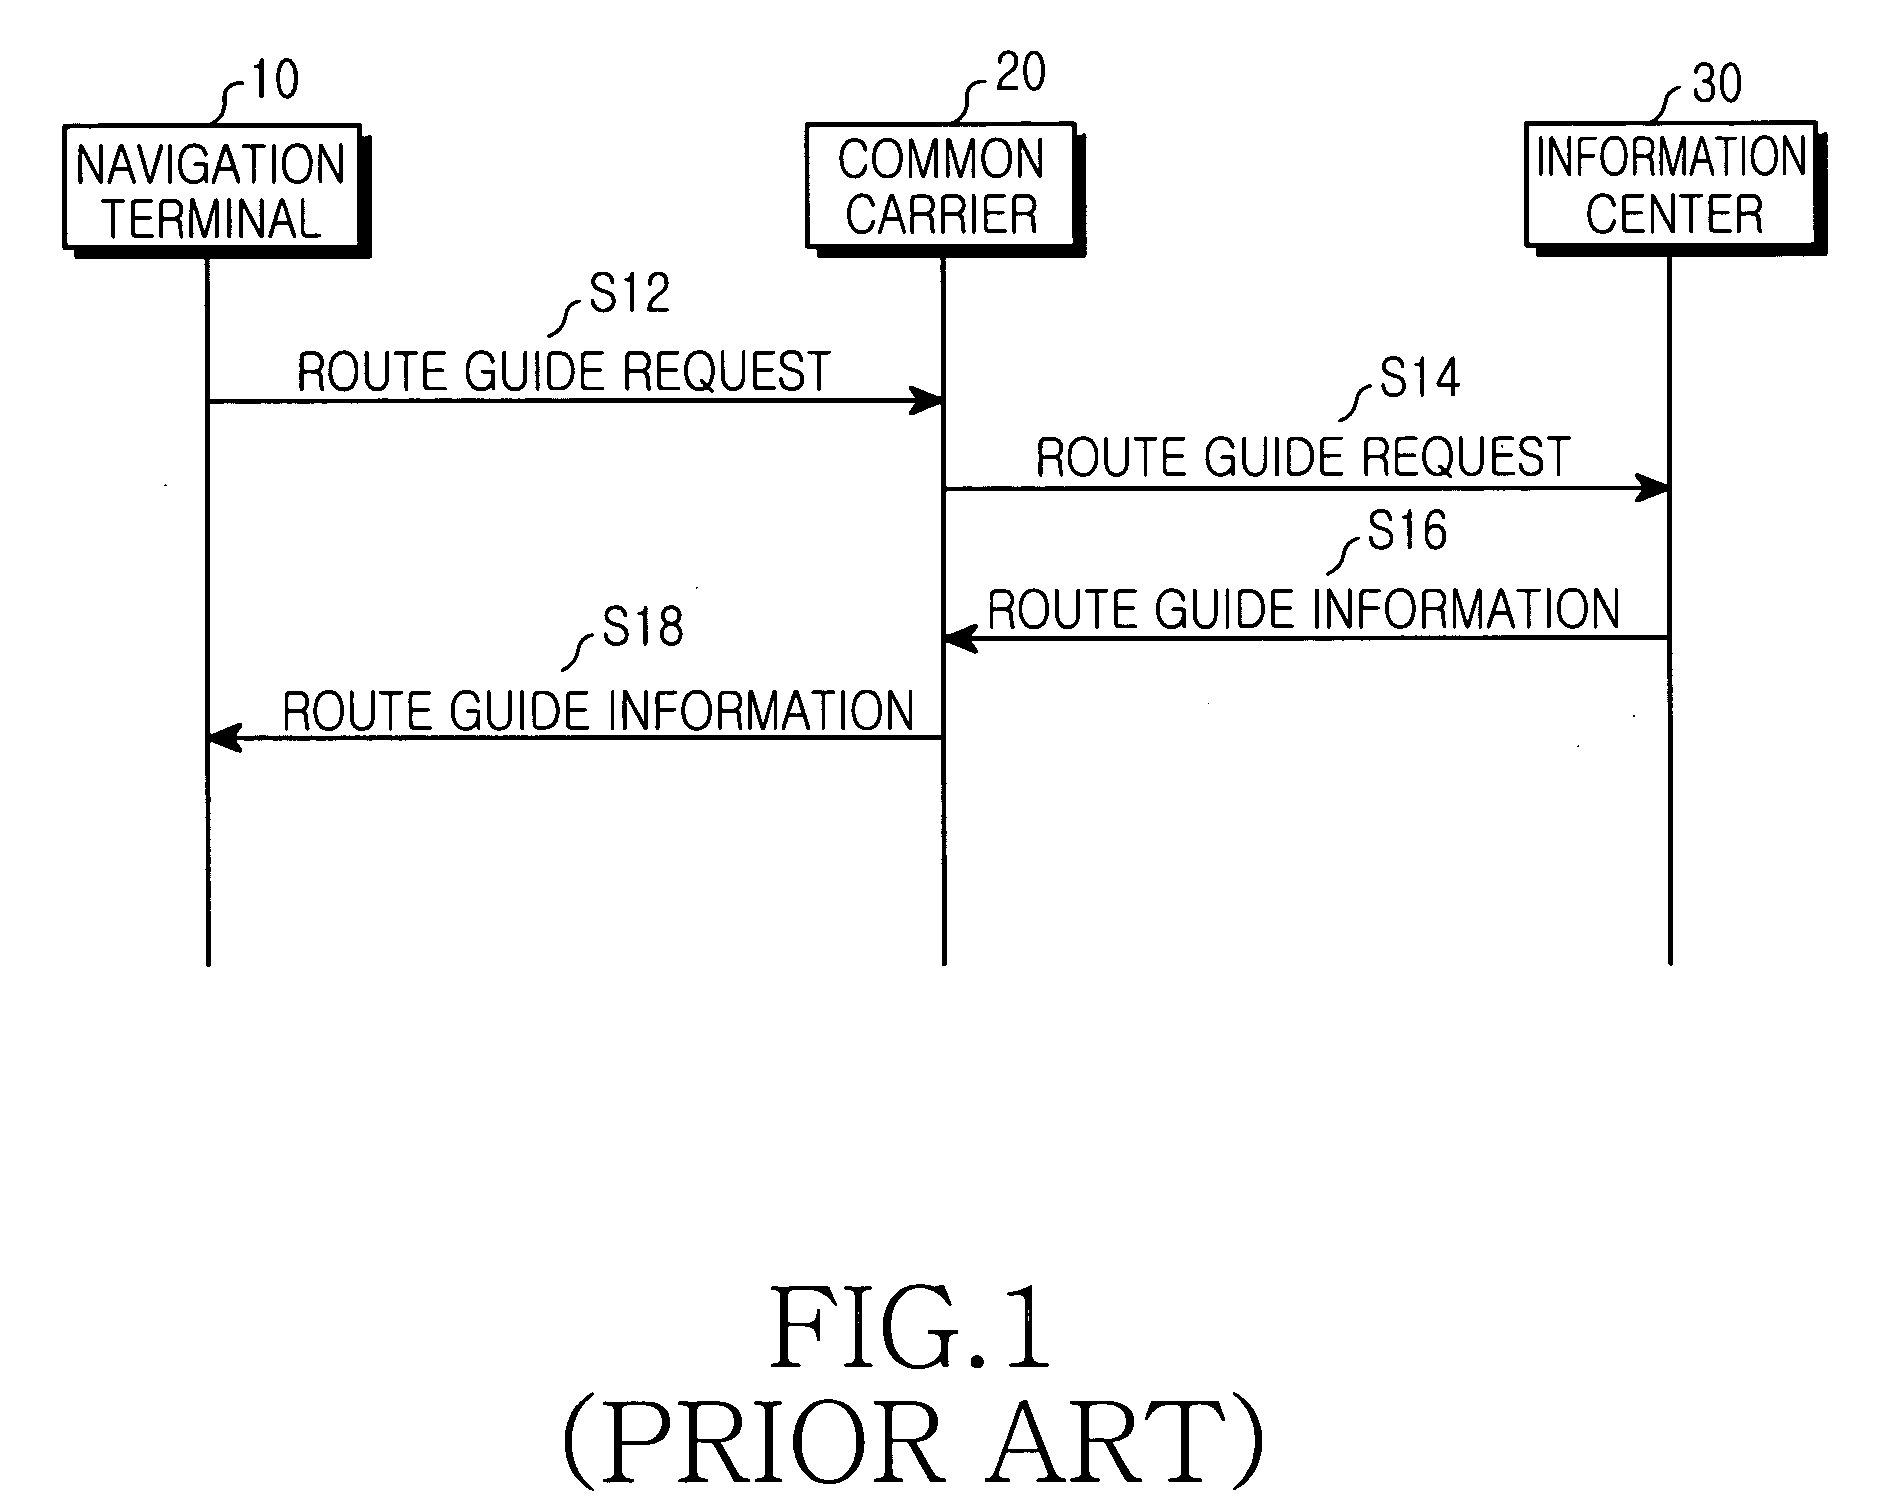 Method for off-line routing